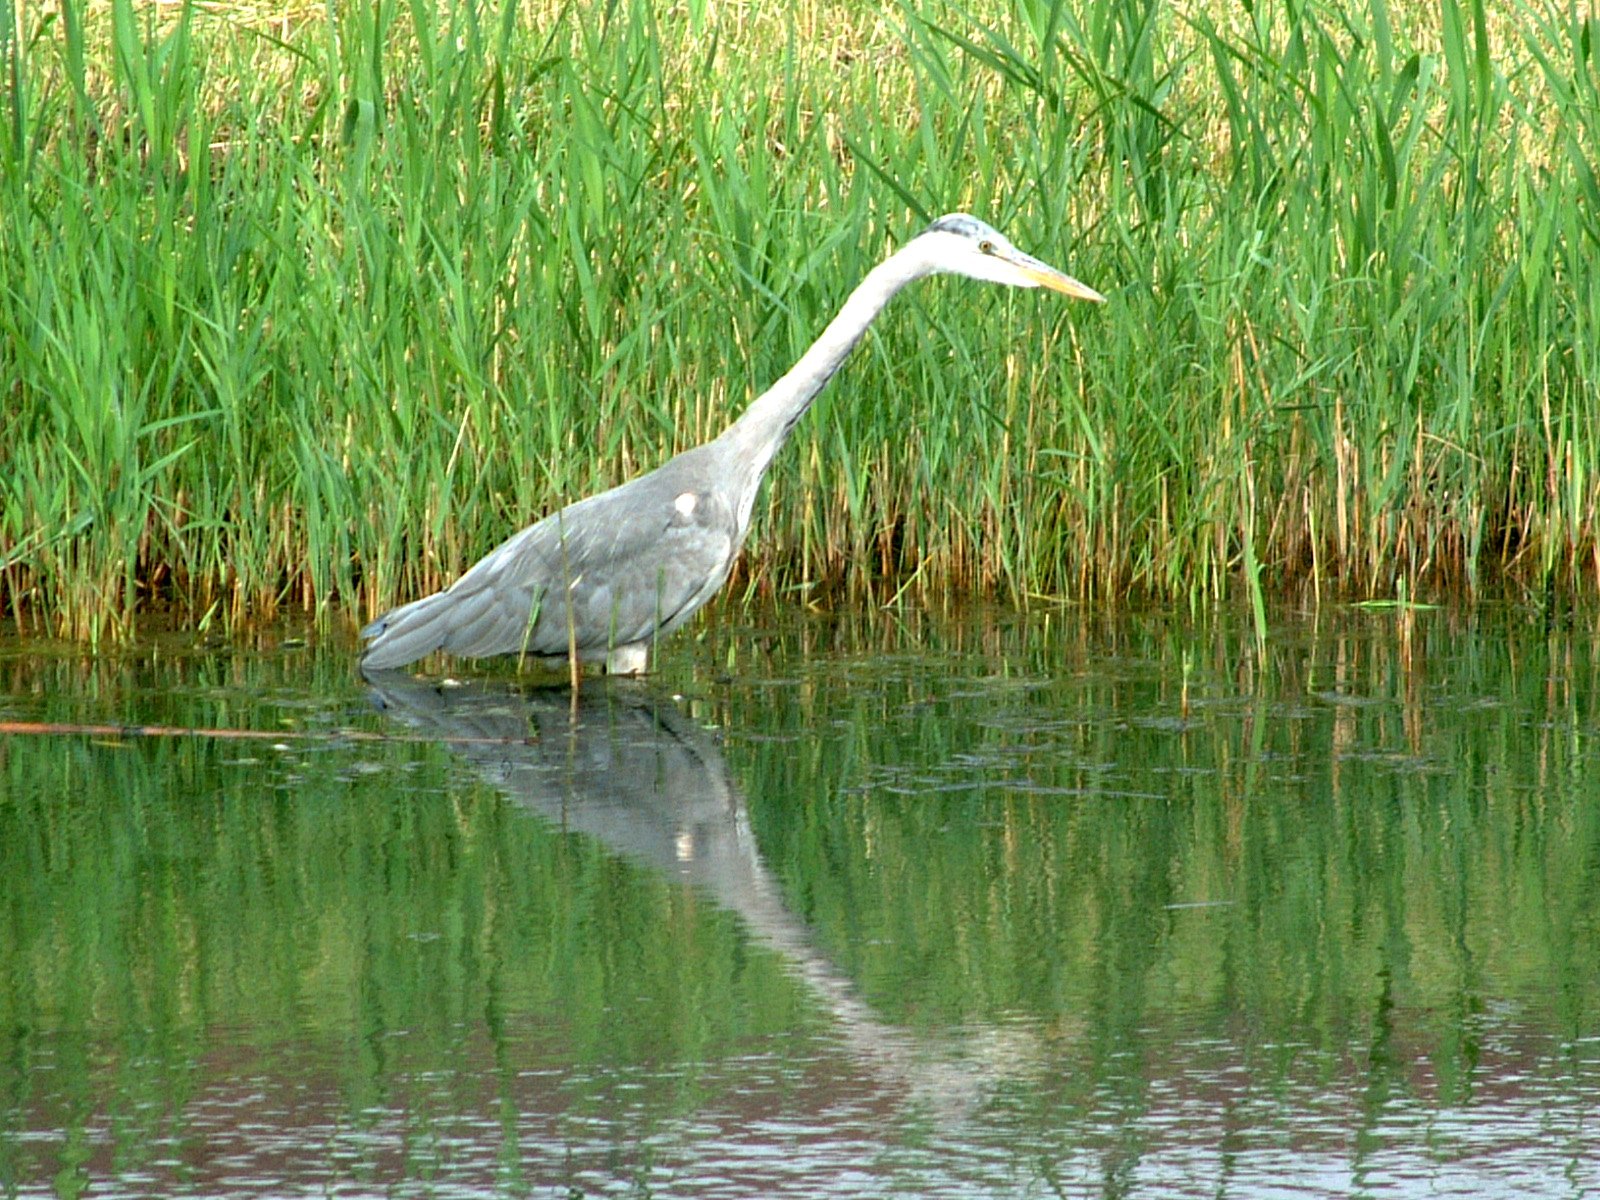 a grey and white bird standing in the water near tall grass